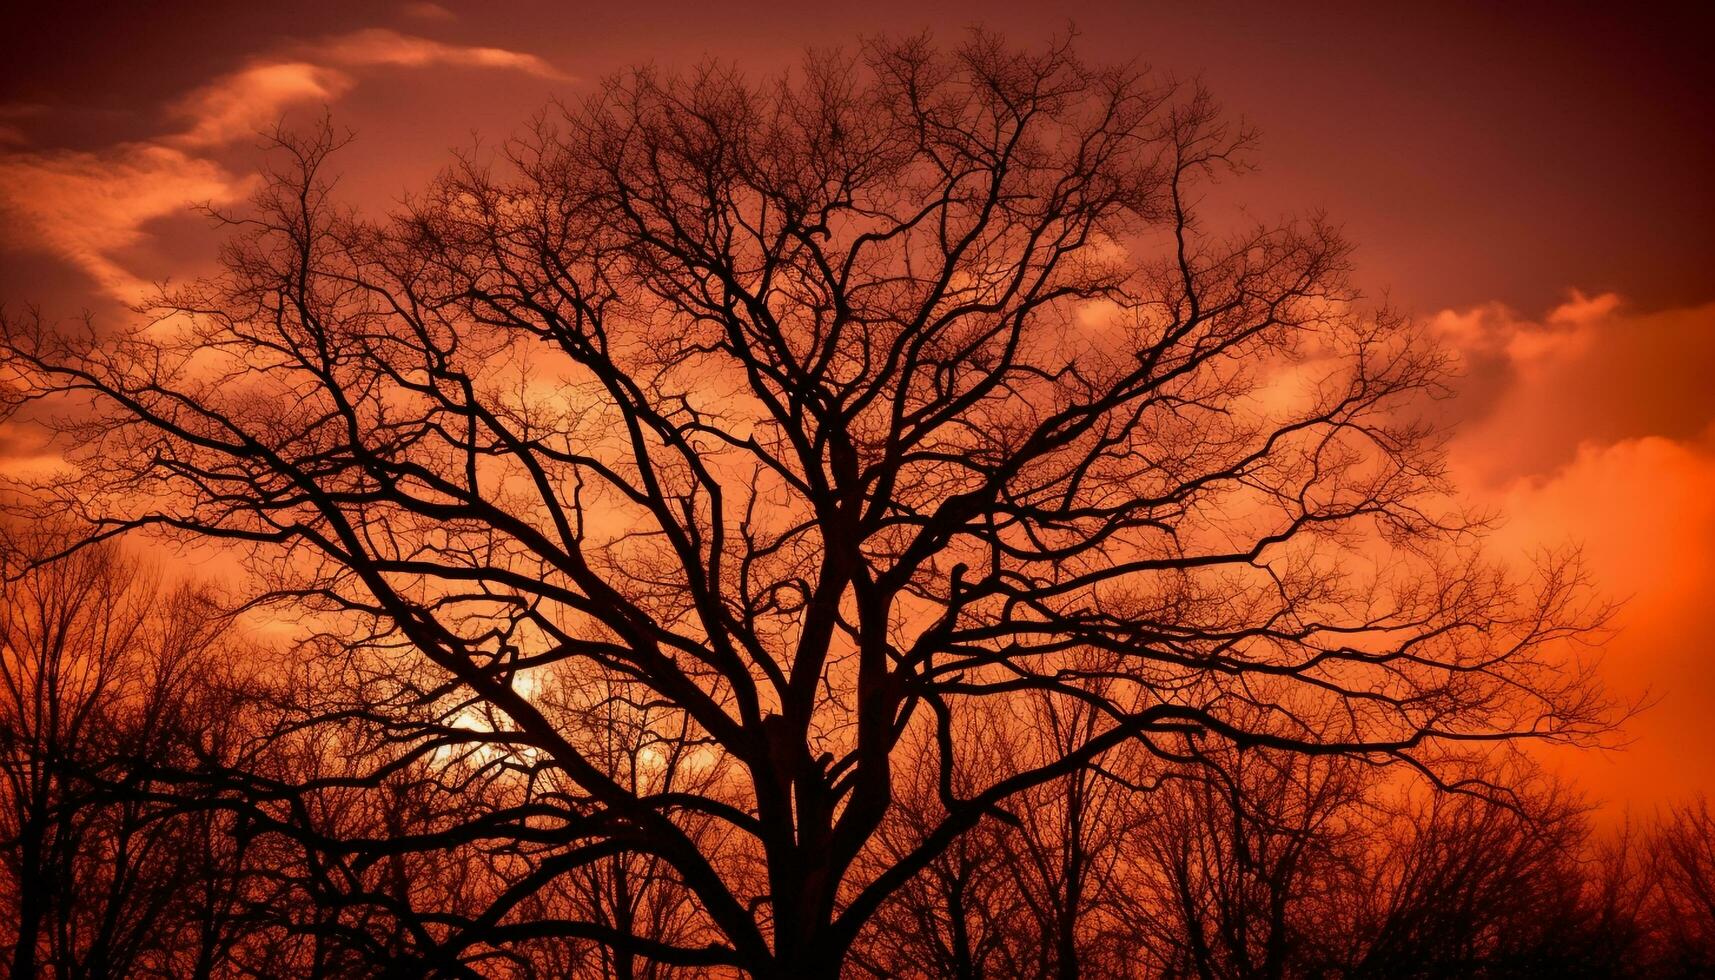 Silhouette of tree branch against moody sky at dusk generated by AI photo